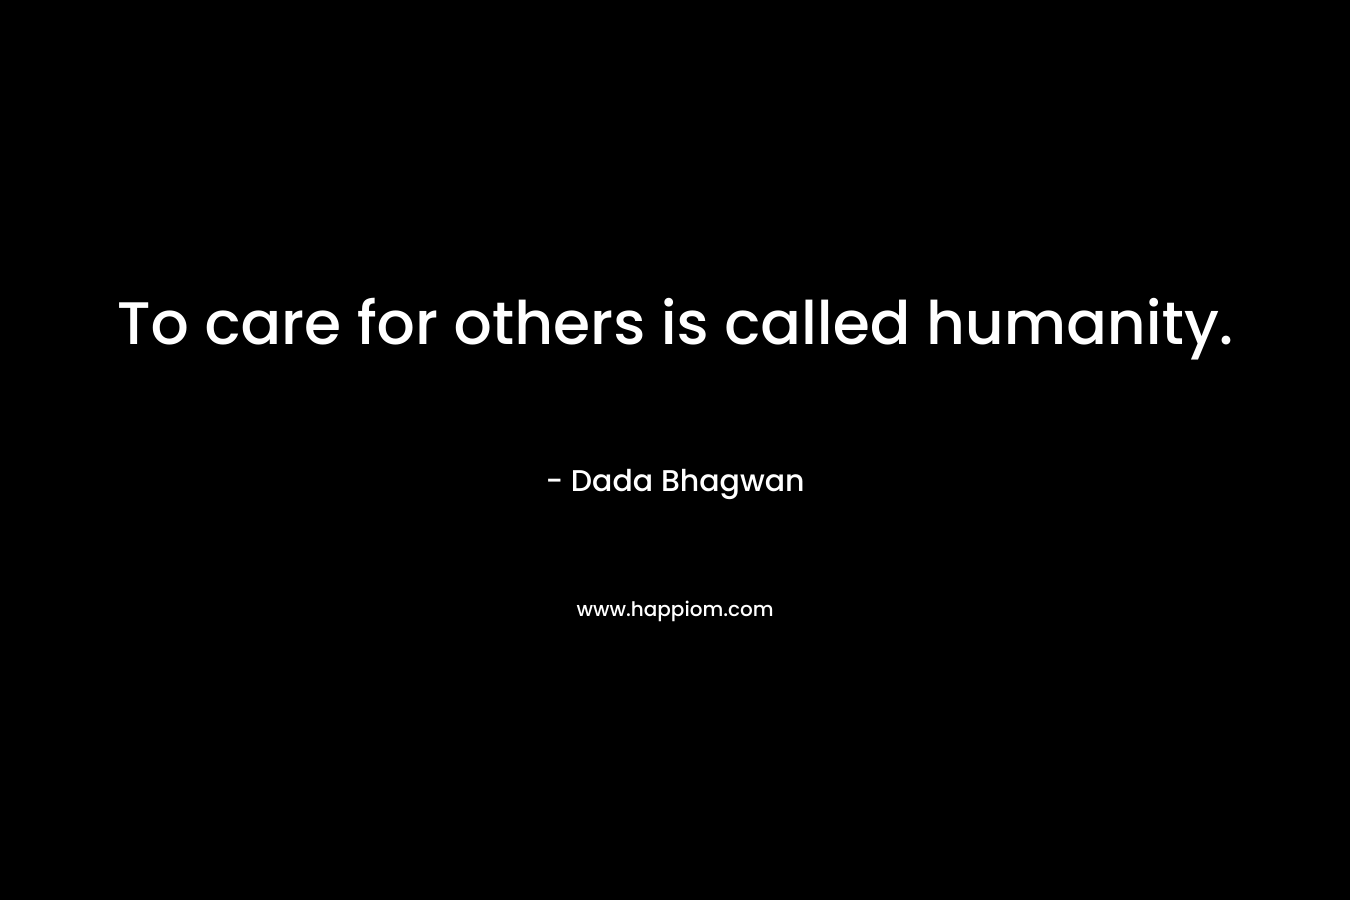 To care for others is called humanity.